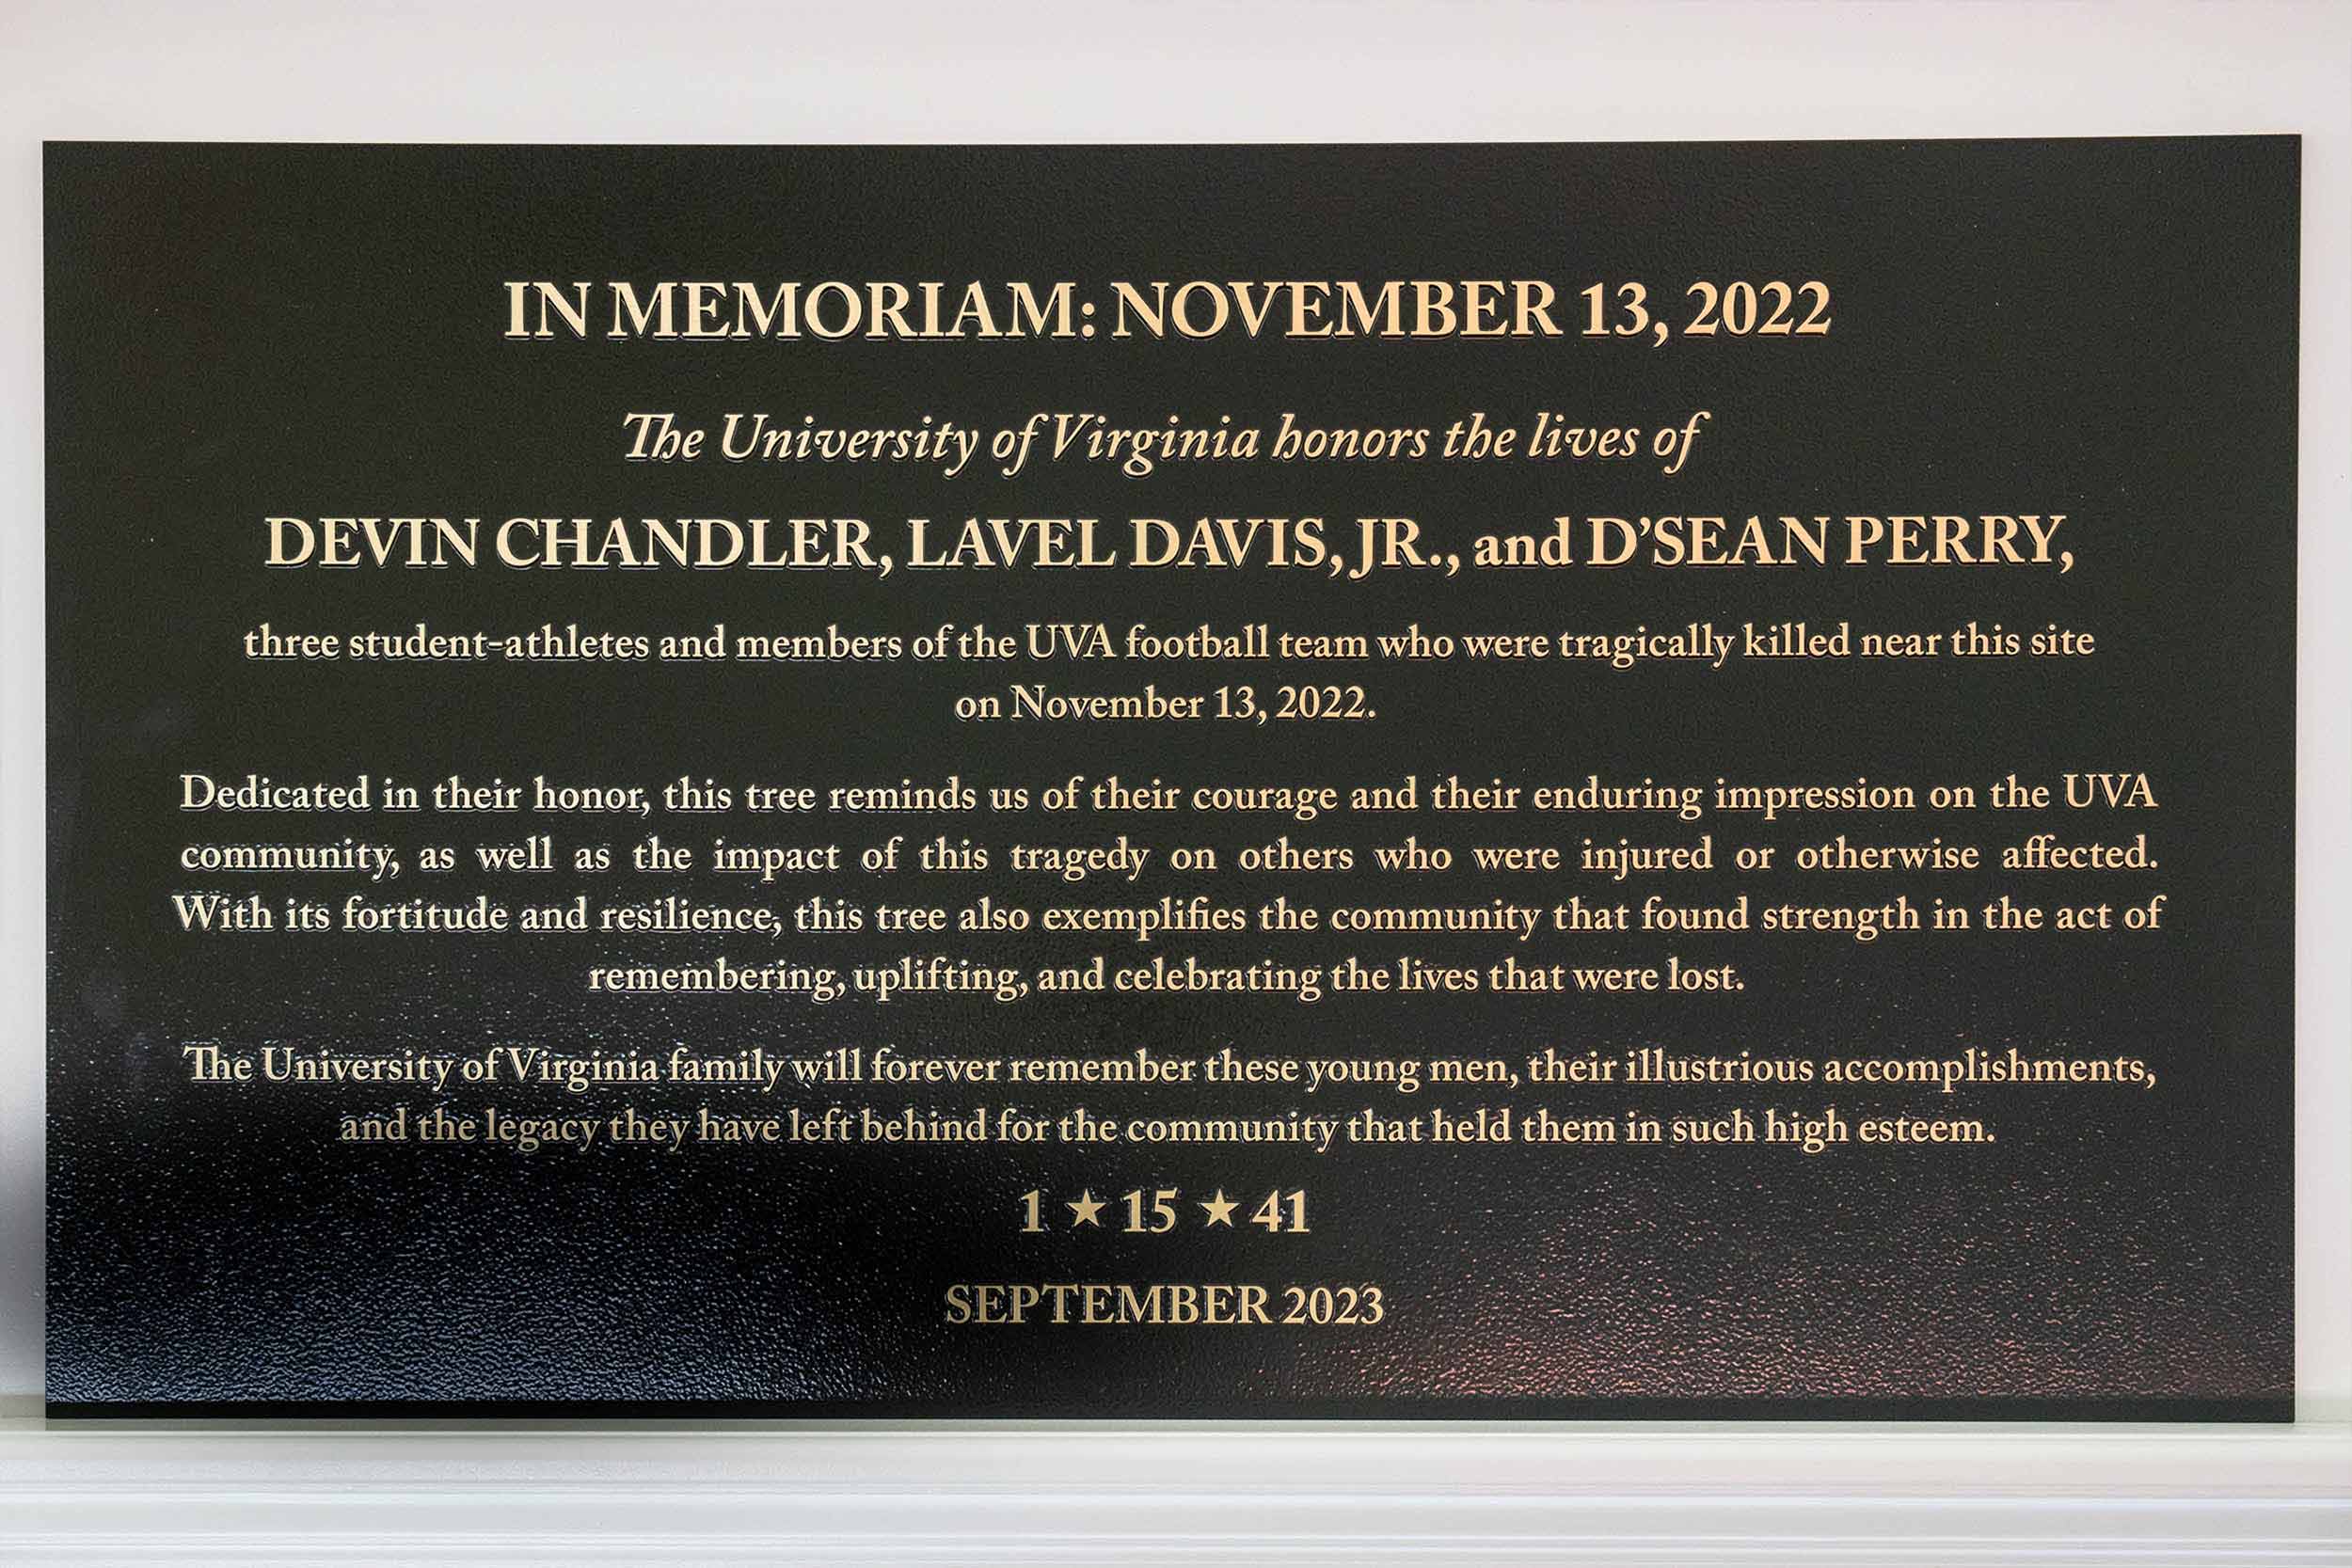 The plaque of the ceremony